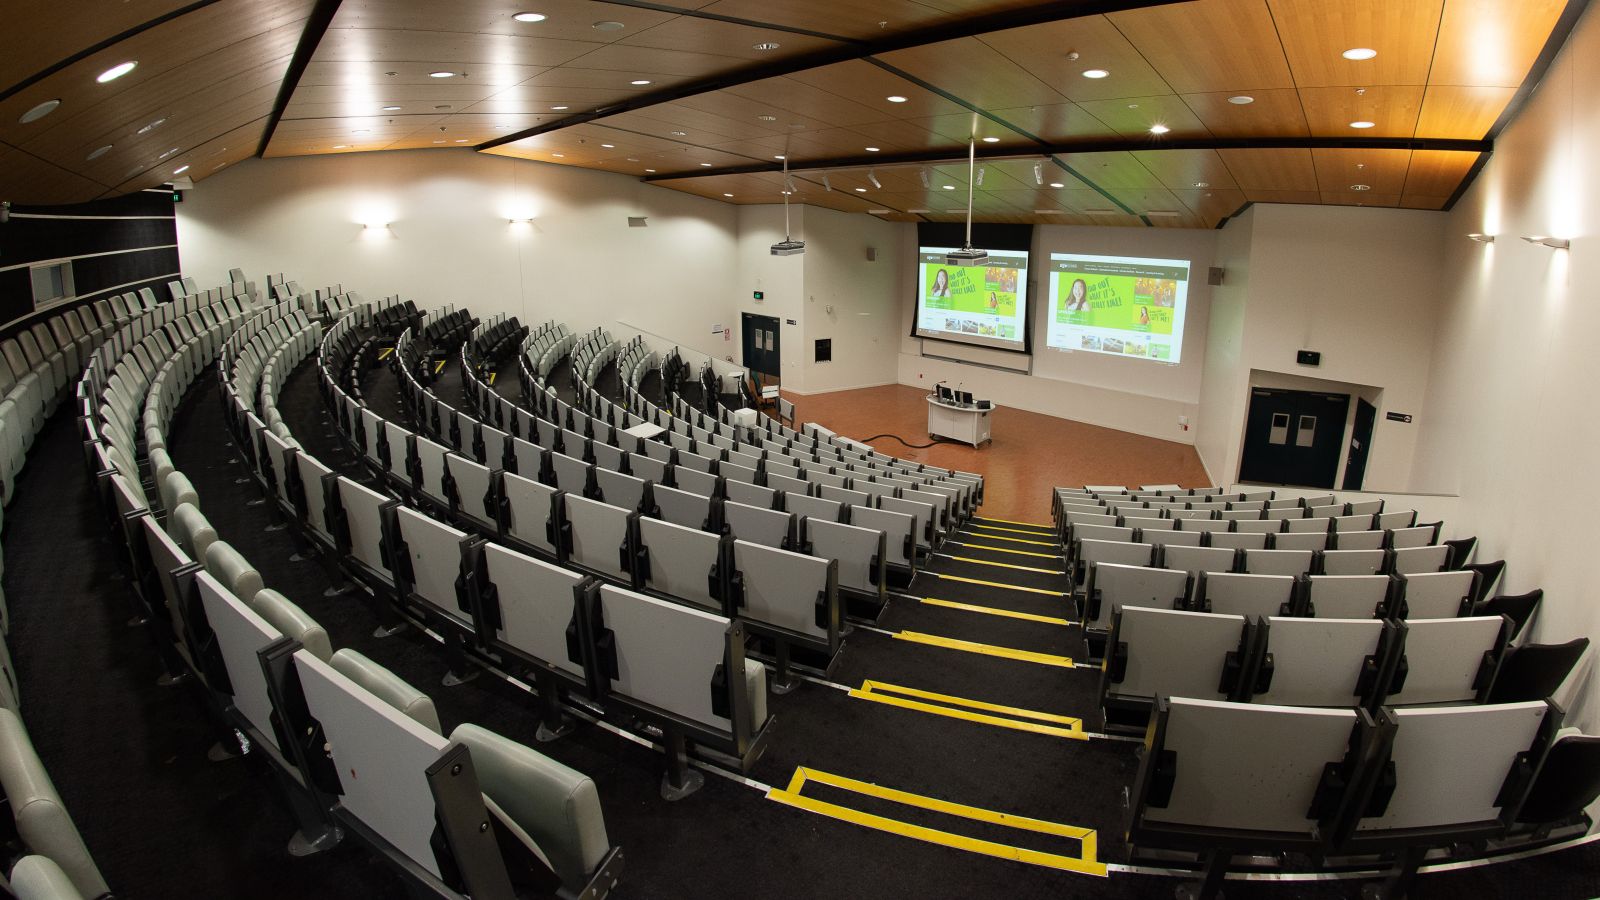 Rear view of large lecture theatre in Rutherford House, with screens and lectern with computer visible